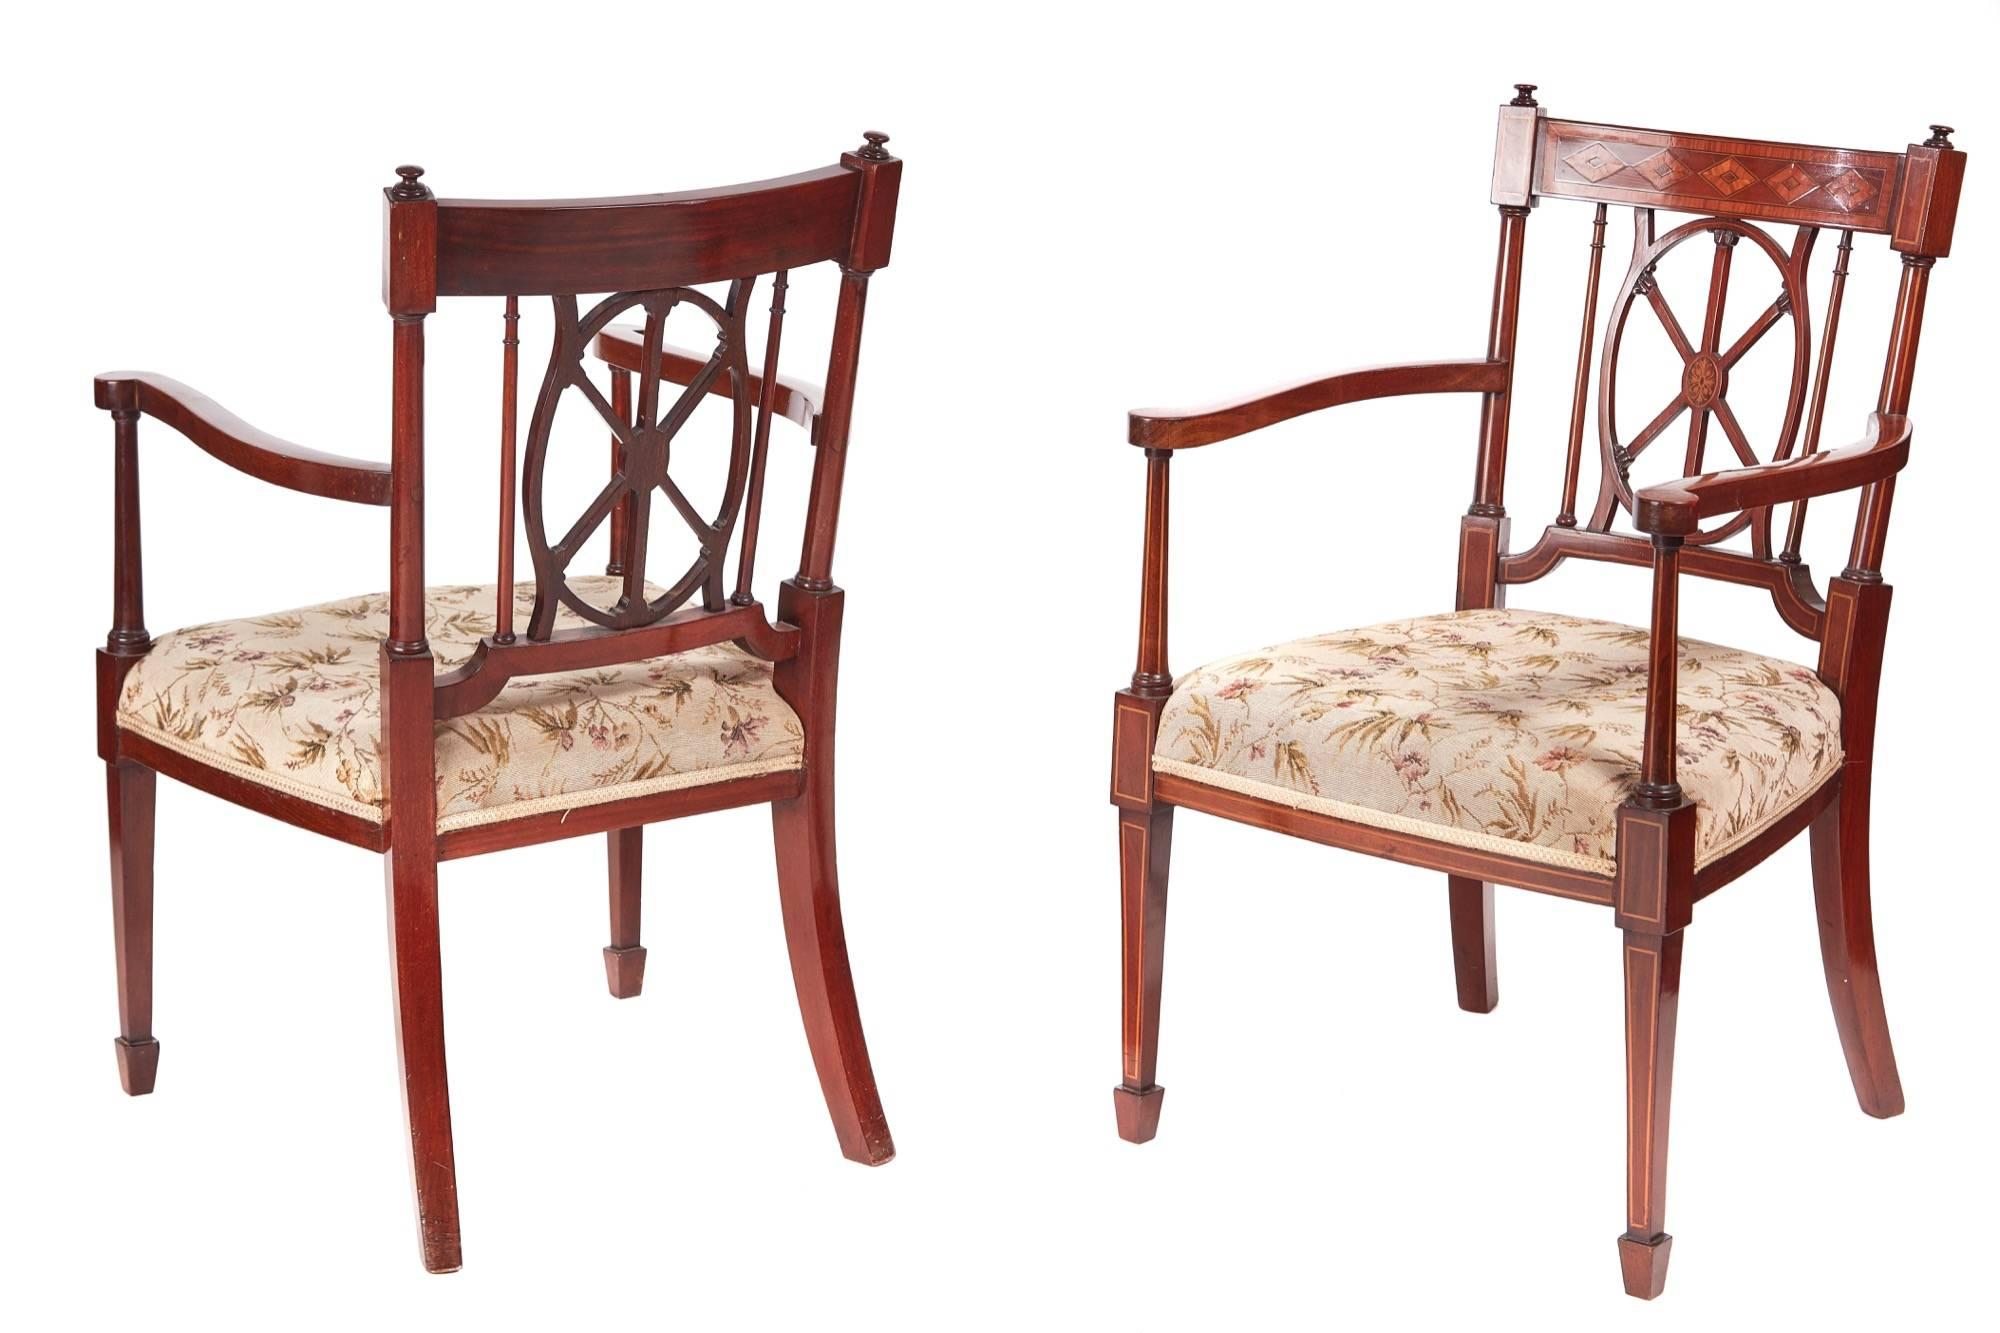 Fine pair of antique mahogany inlaid arm/desk chairs, with fine inlaid satinwood tops, lovely inlaid centre splat, shaped inlaid arms, standing on inlaid square tapering front legs terminating in spade feet outswept back legs
Lovely color and